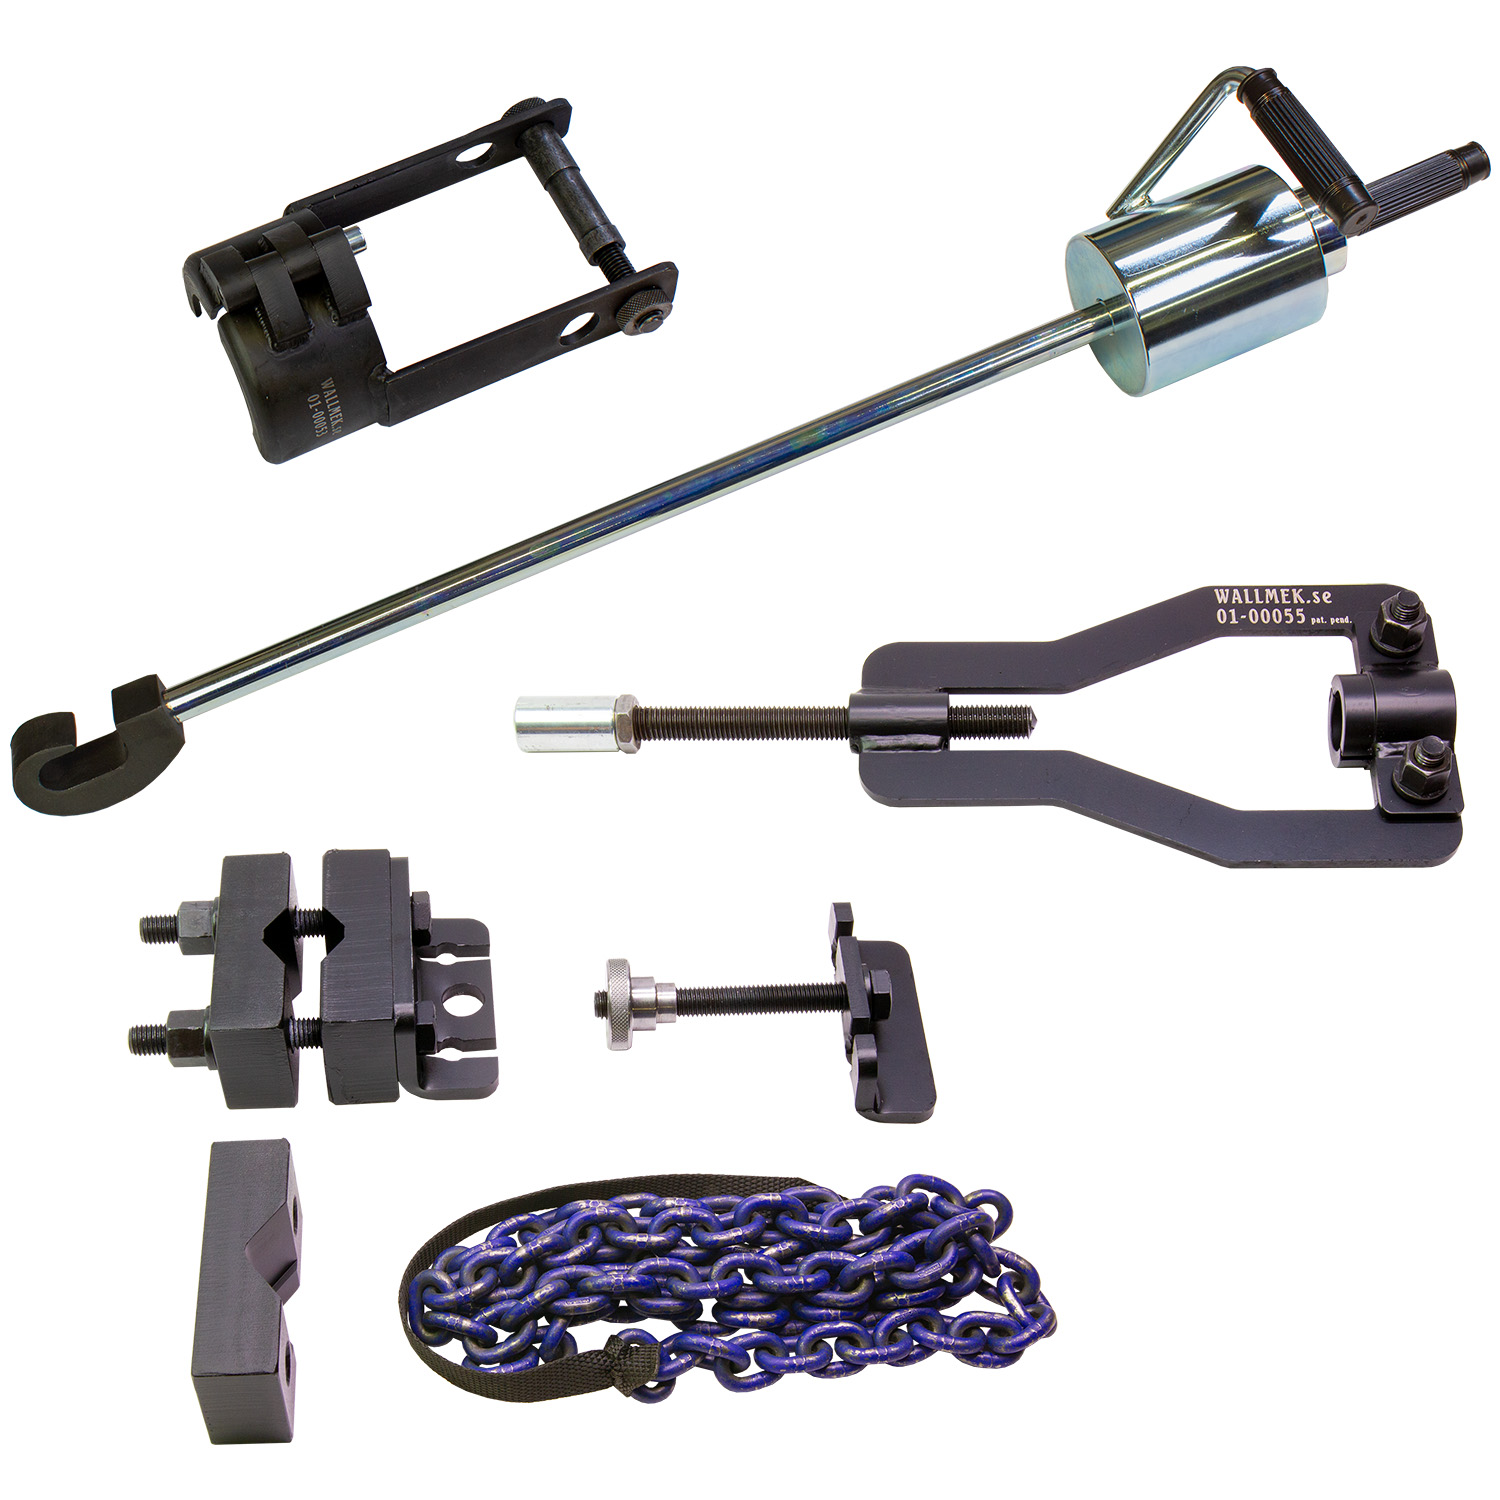 inner/outer axle shaft tool set